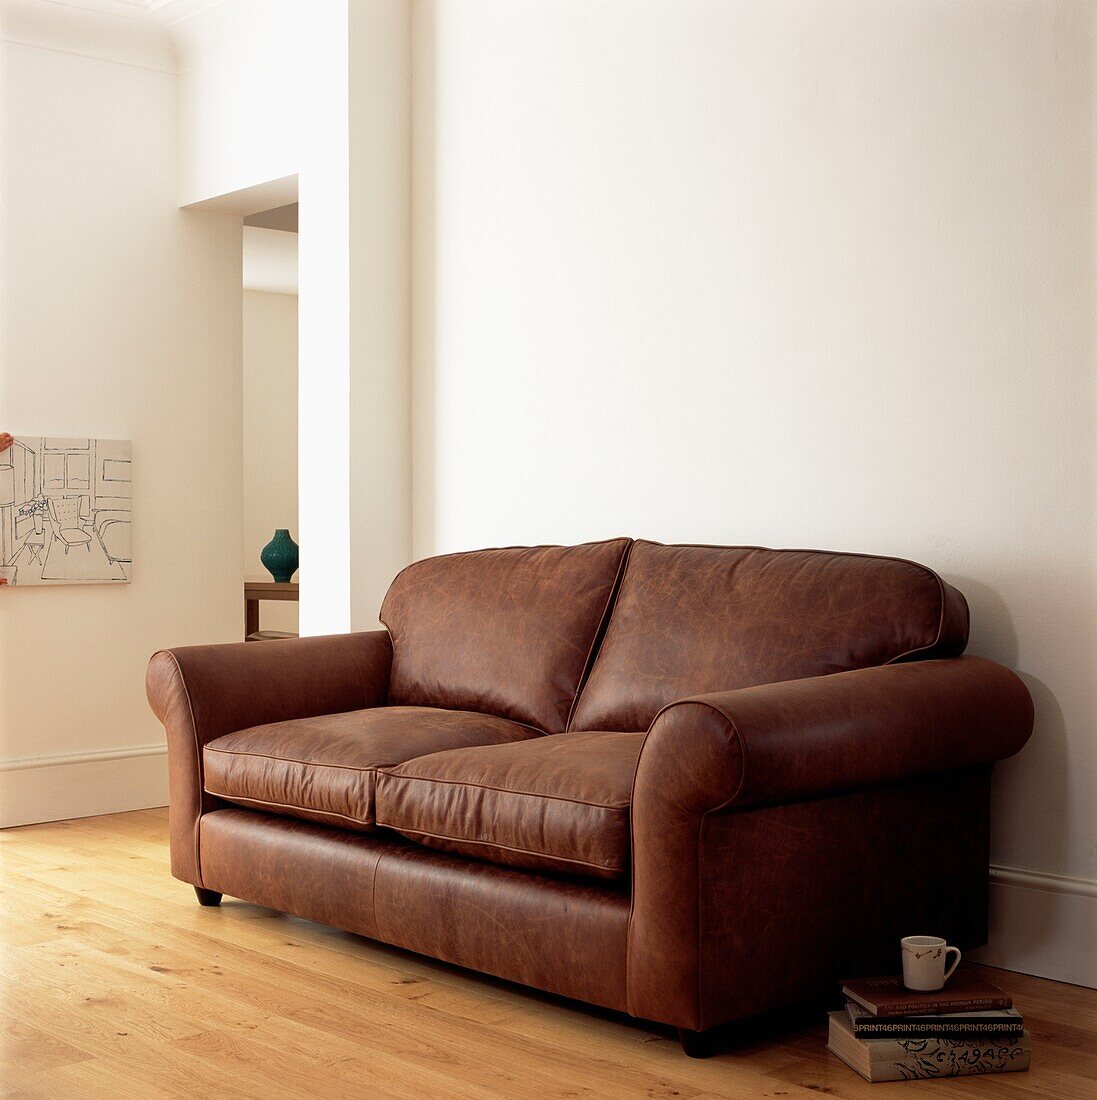 Brown leather sofa in white room with wooden floors